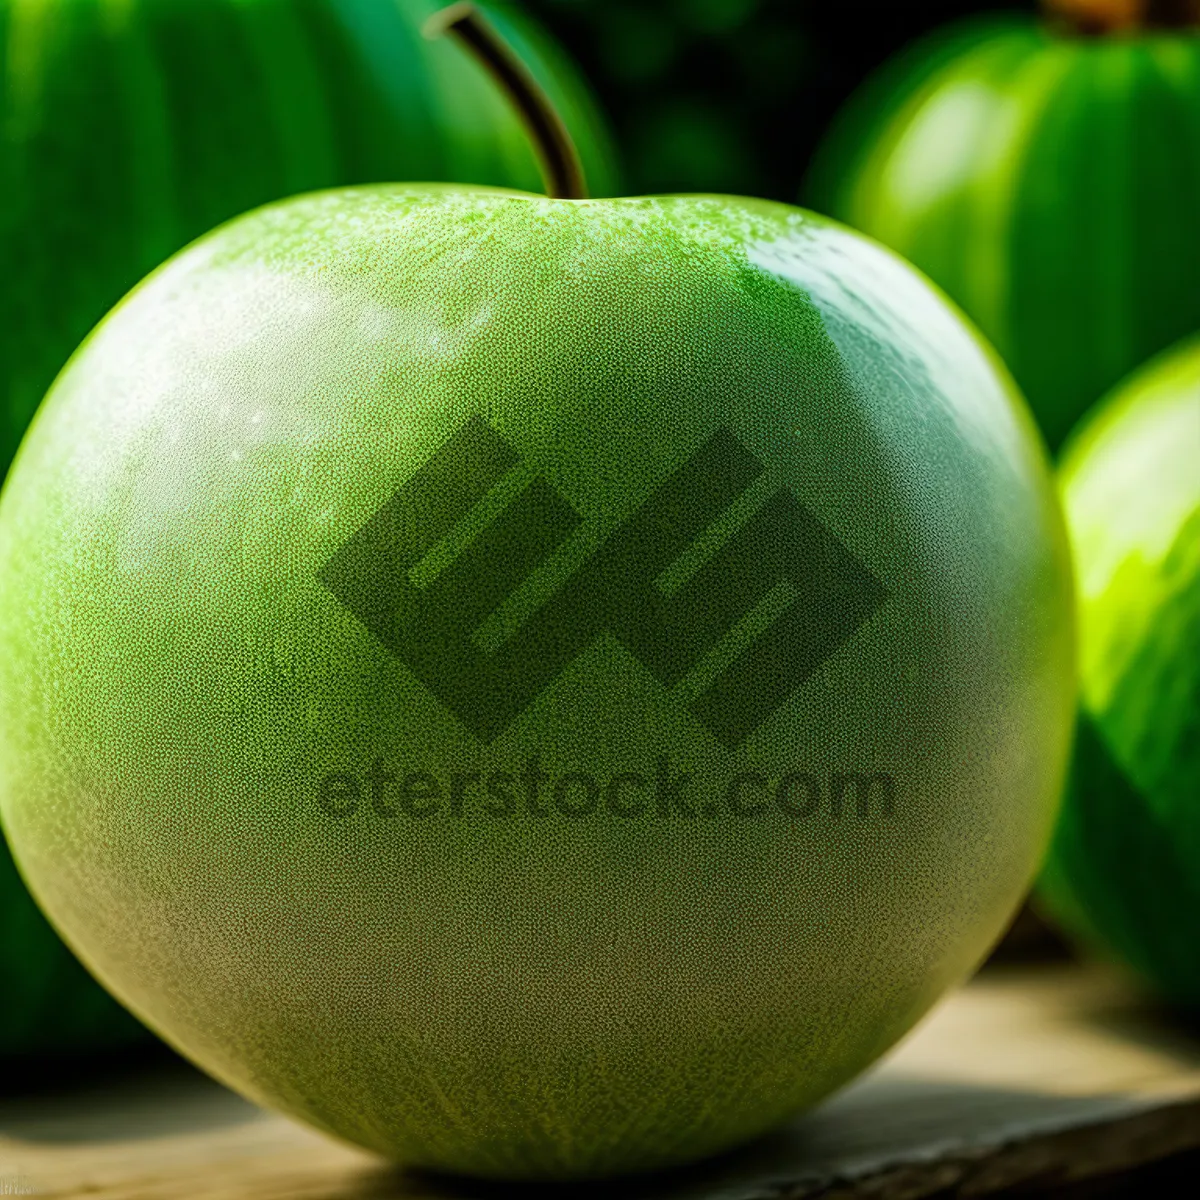 Picture of Juicy Granny Smith Apple, Fresh and Healthy